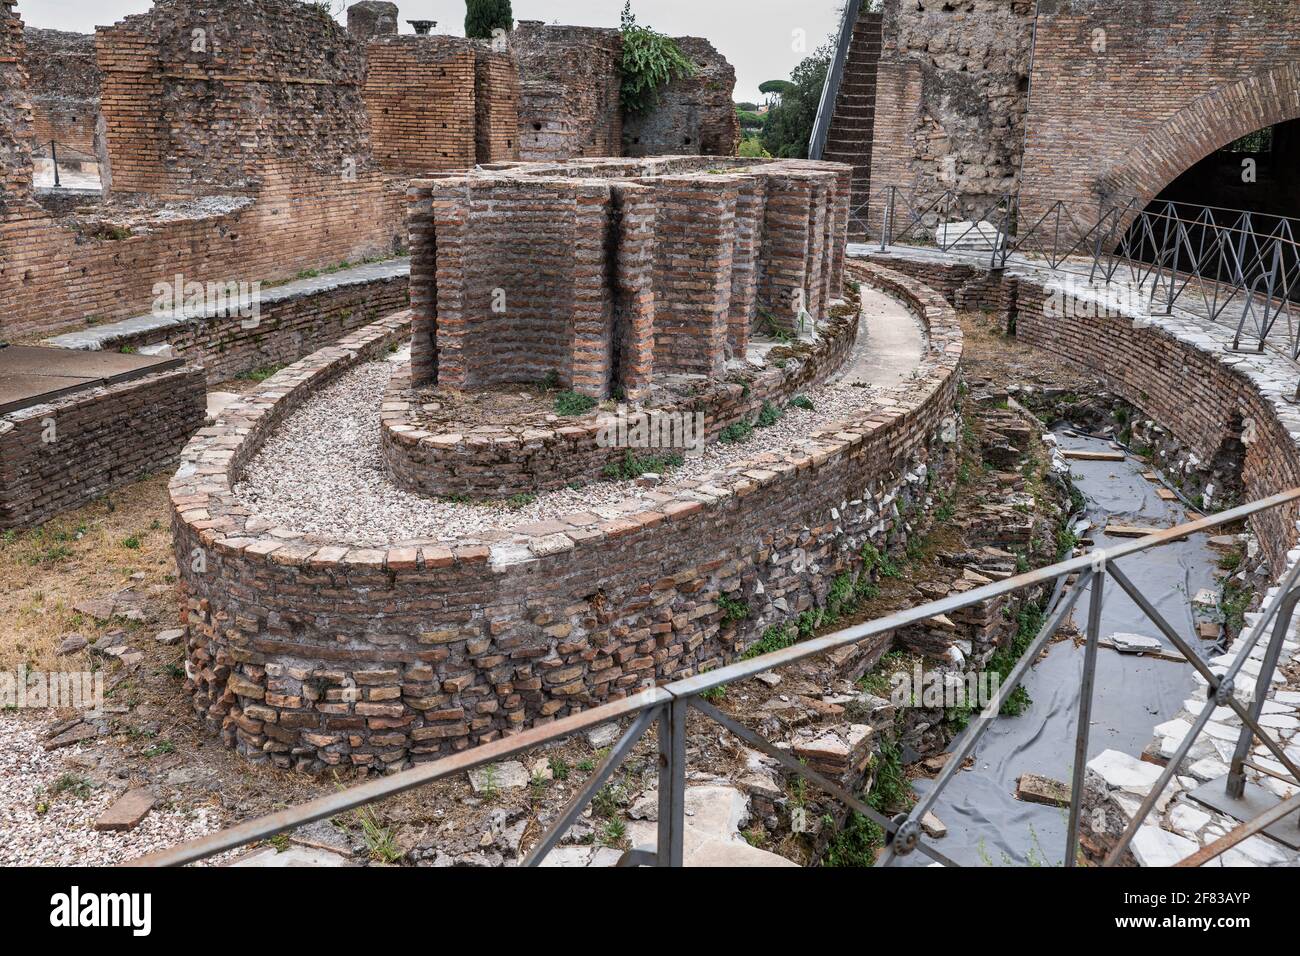 Elliptical nymphaeum in Domus Flavia (Flavian Palace) part of the Palace of Domitian on Palatine Hill in Rome, italy Stock Photo